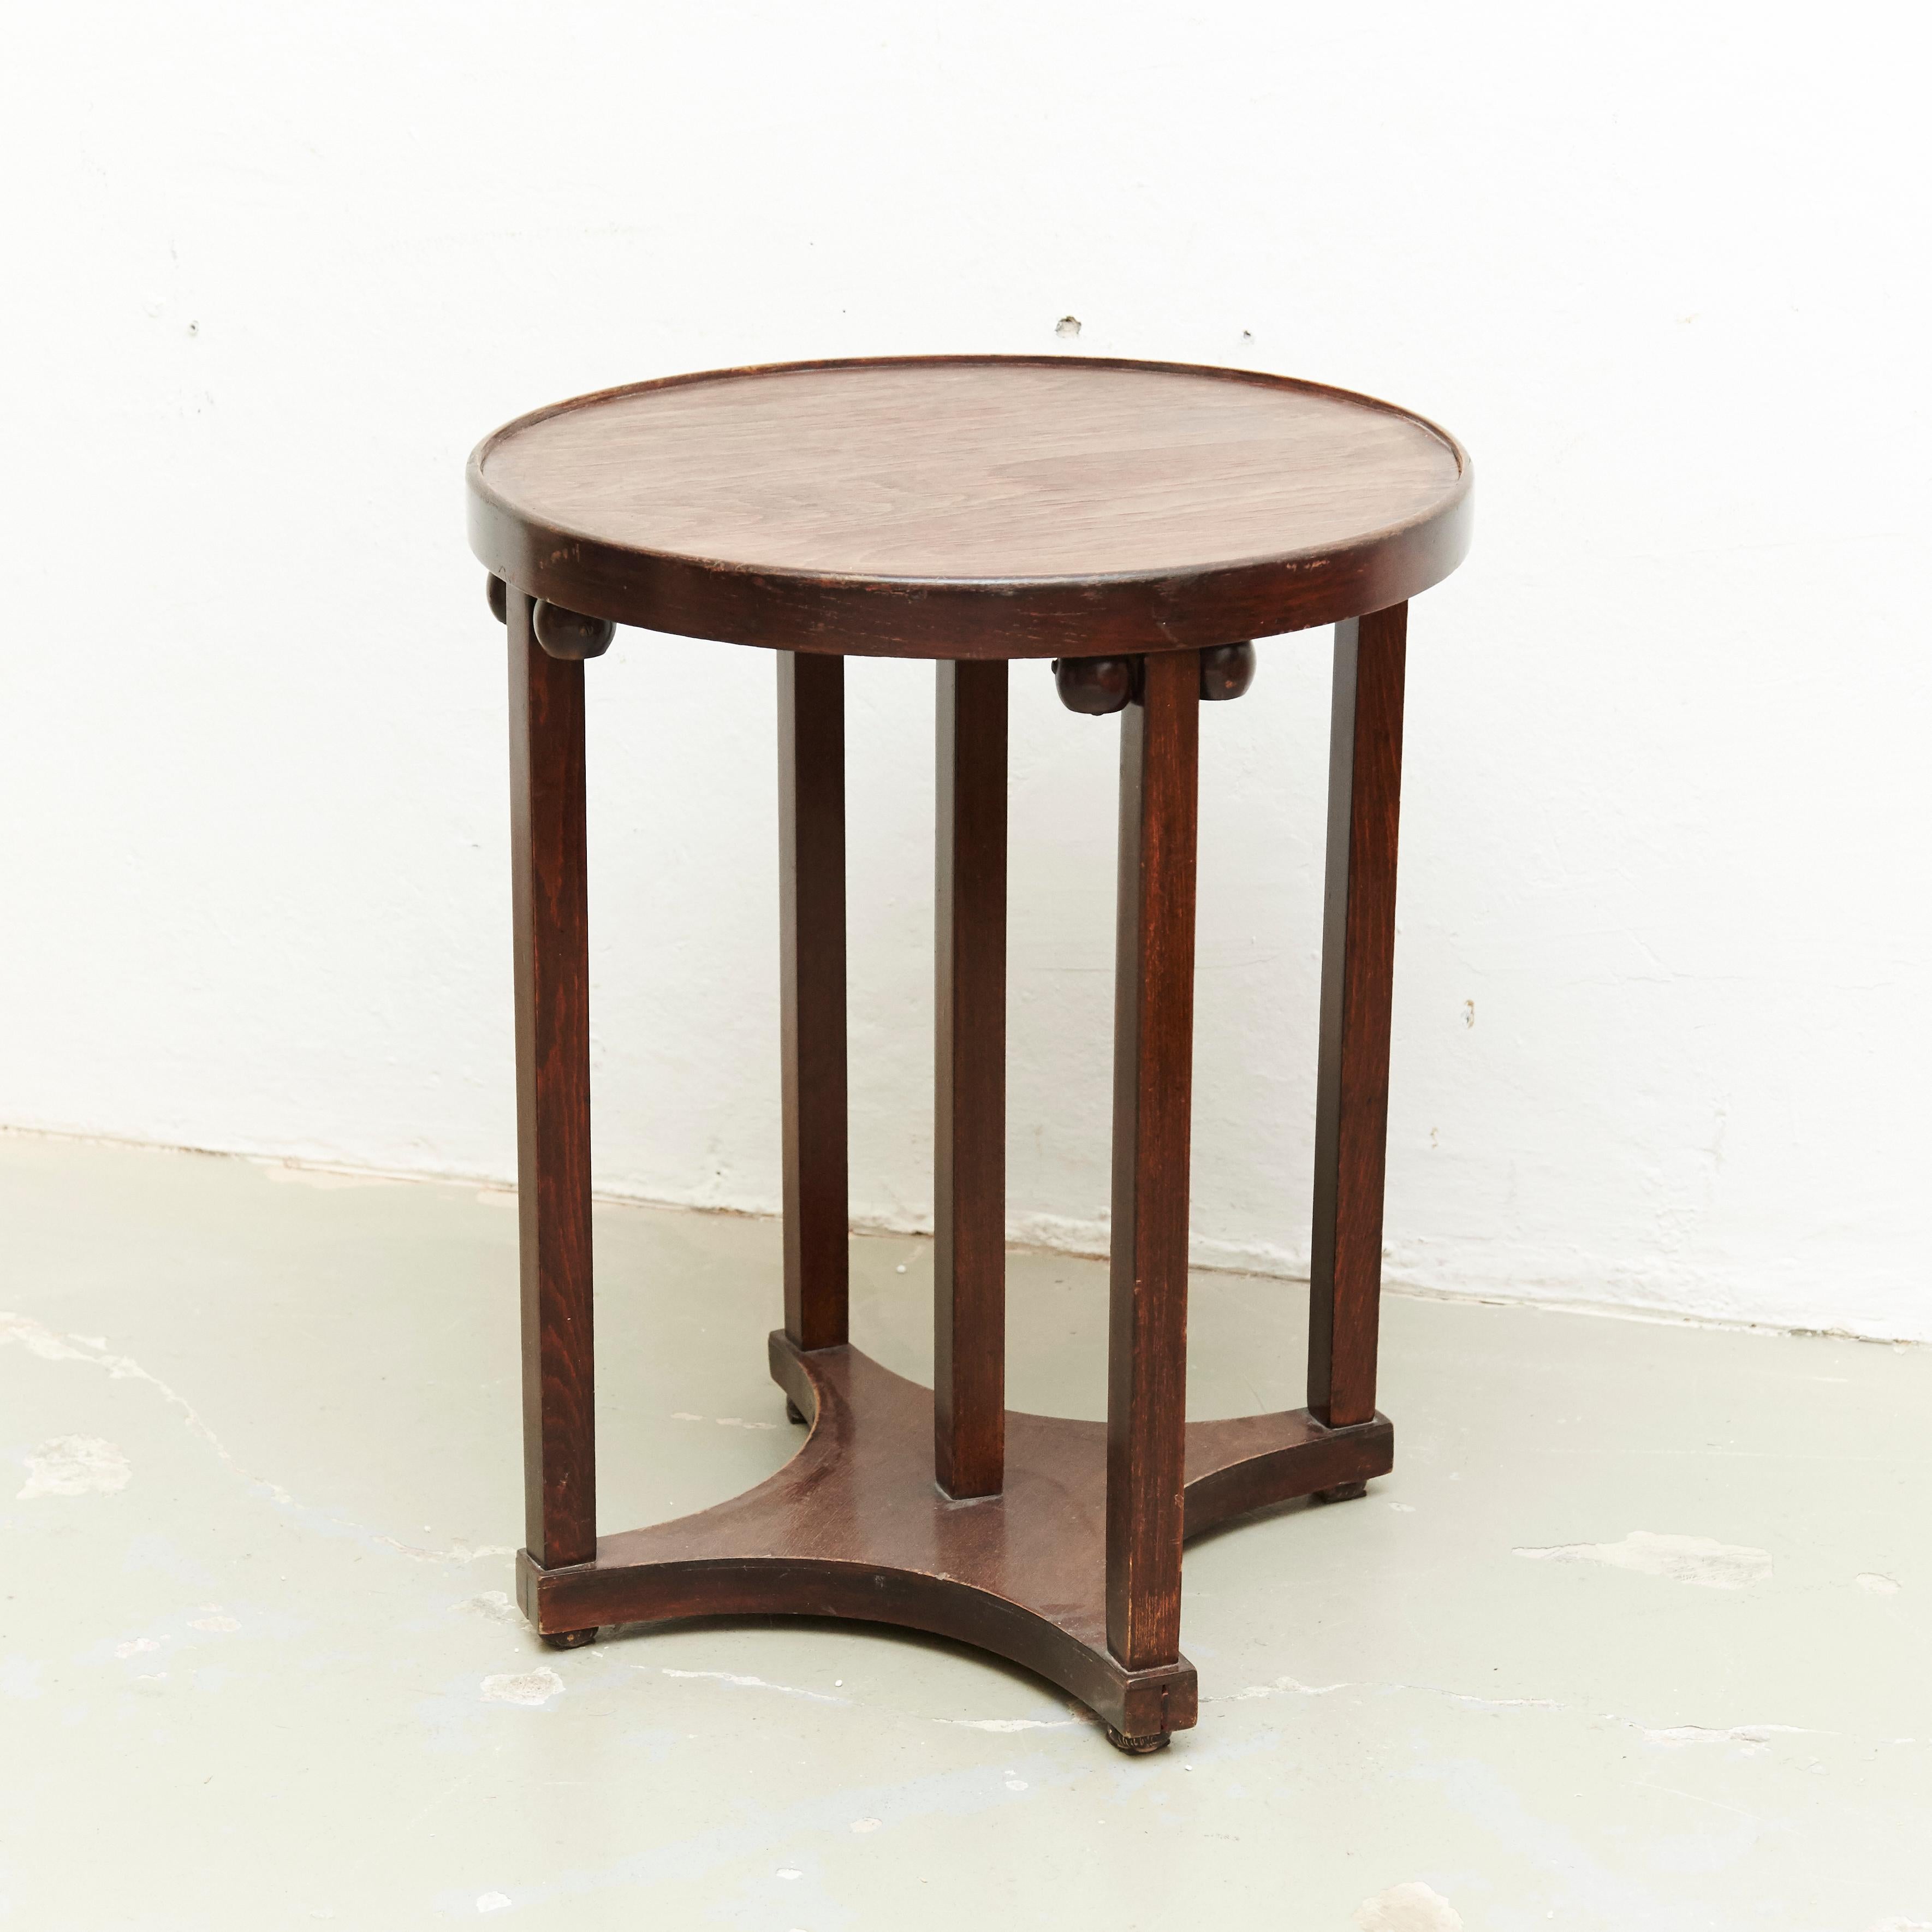 Table designed by Josef Hoffmann.
Model 915/1p Art Nouveau table from Jacob & Josef Kohn manufactured, circa 1920.

Measures: Diameter 60, height 72 cm.

In original condition, with minor wear consistent with age and use, preserving a beautiful